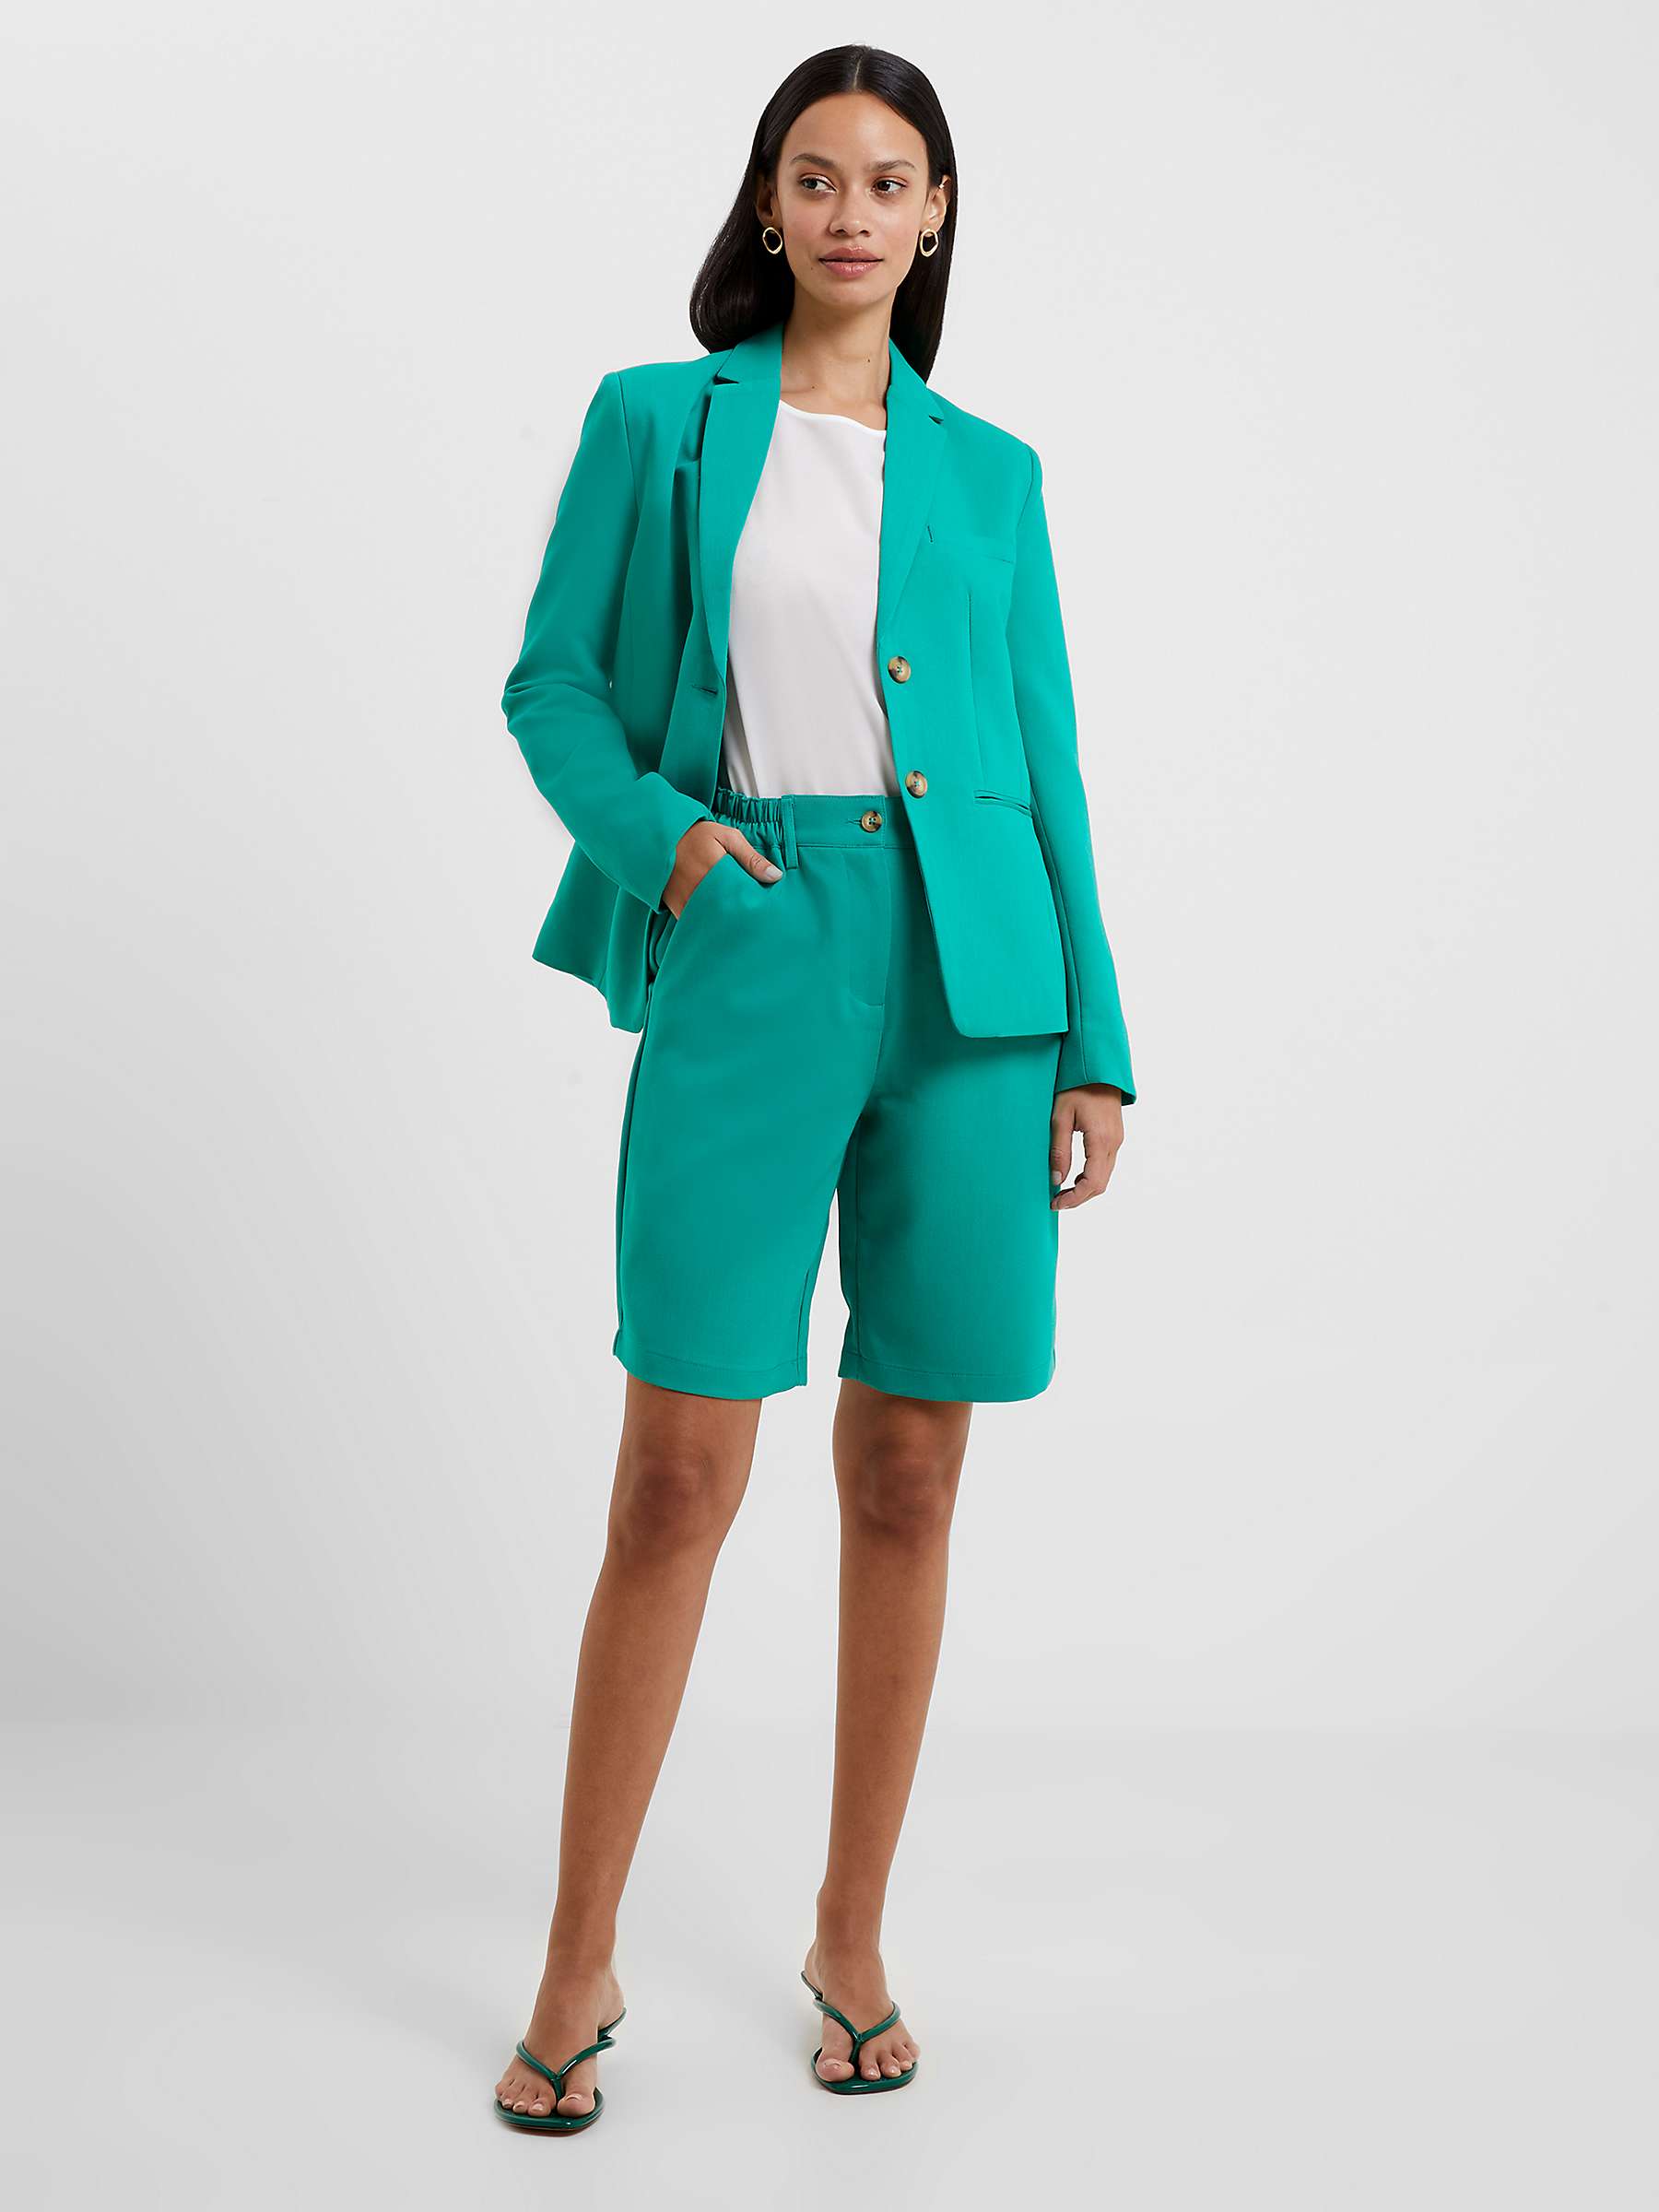 Buy French Connection Single Breasted Blazer Online at johnlewis.com